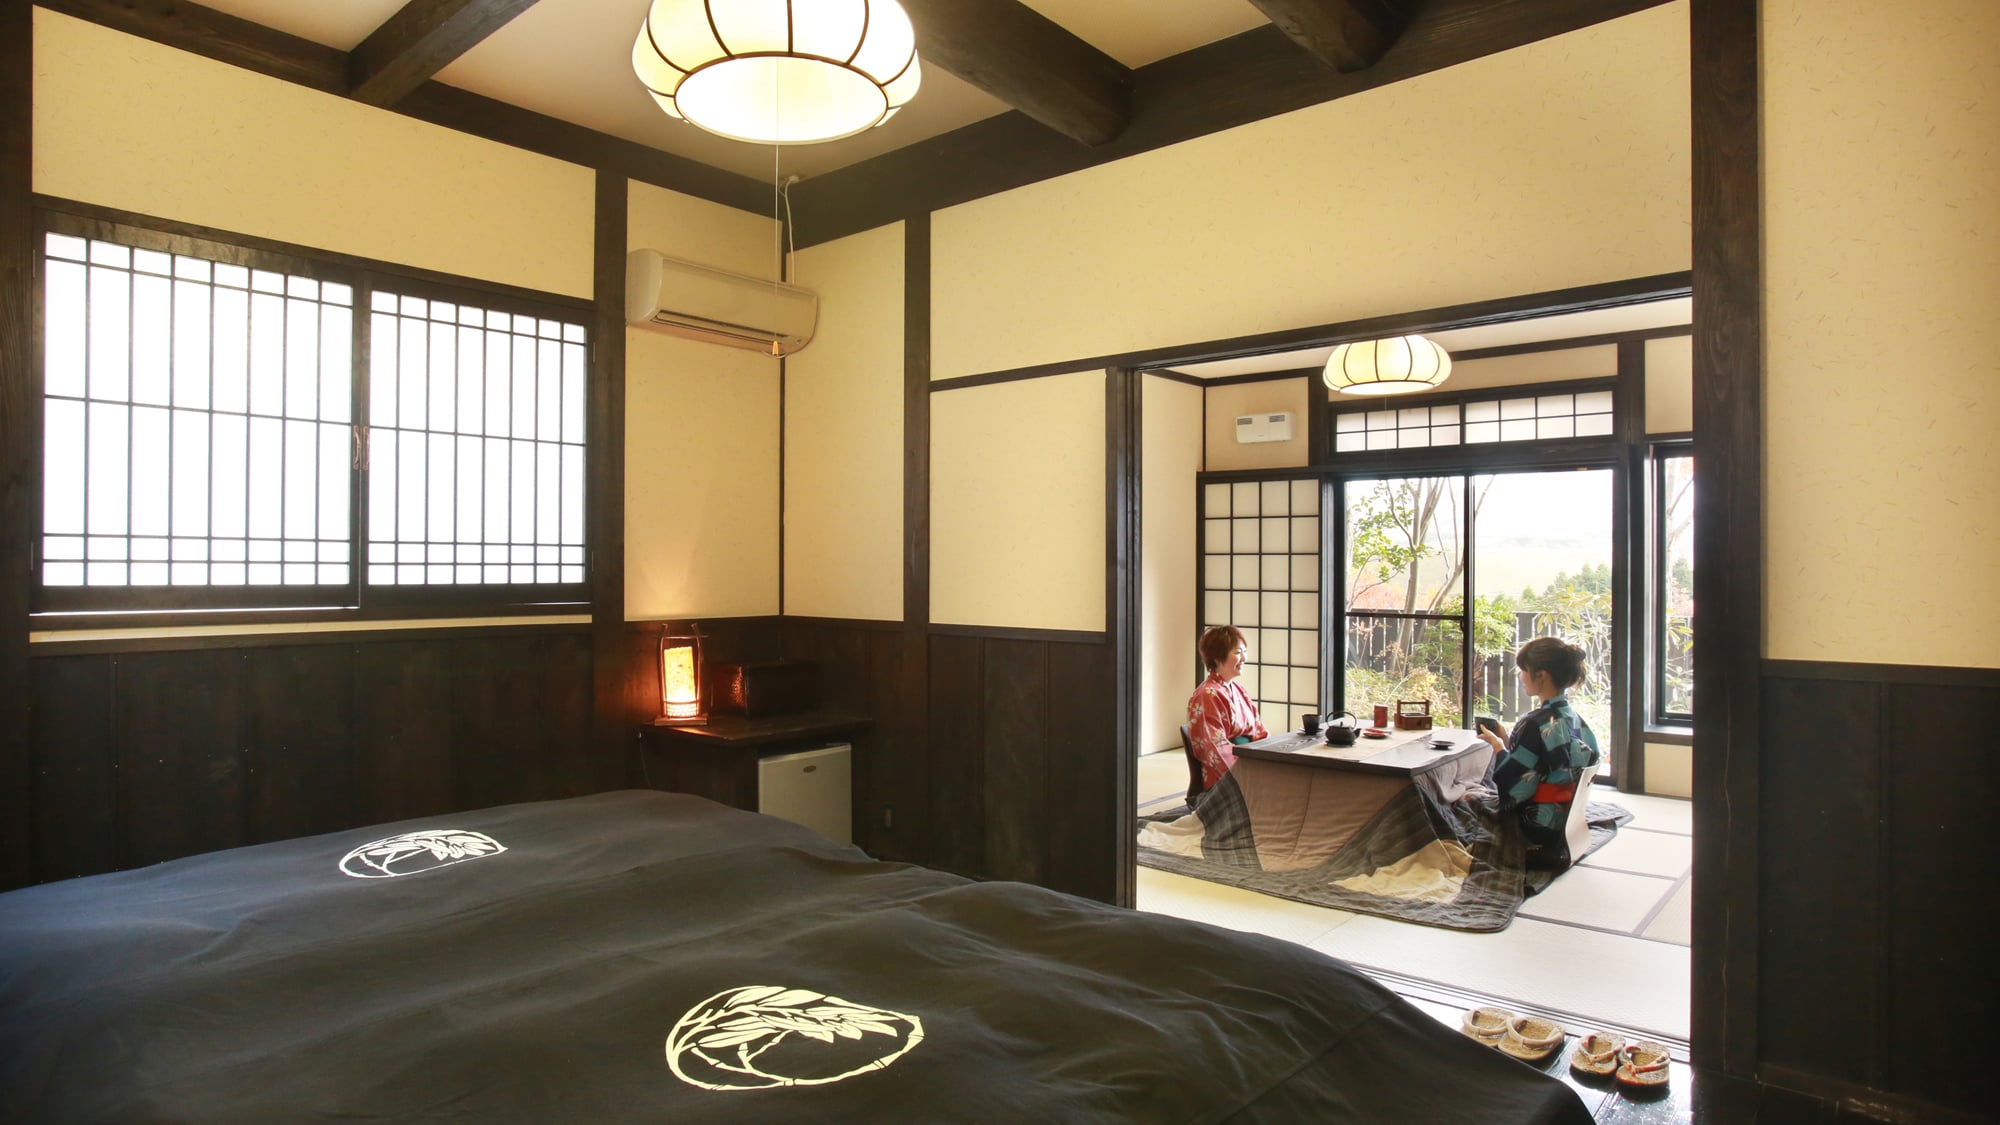 (Kotatsu in winter) with open-air bath [Japanese-Western style room] Japanese-style room about 11 tatami mats + Western-style room about 10 tatami mats [Seiwa]